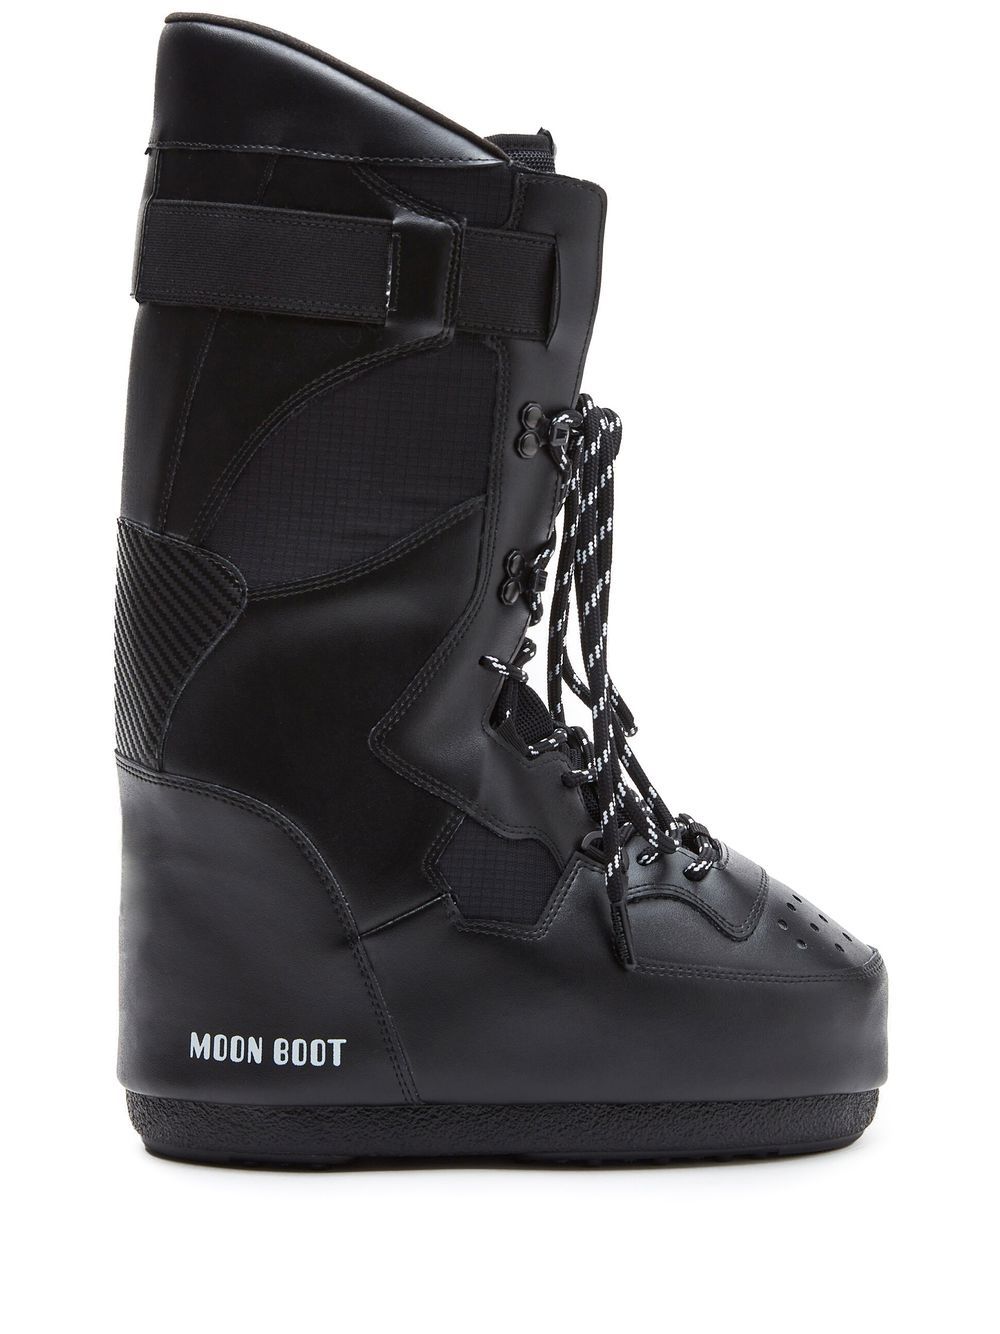 Moon Boot high lace-up sneaker boots - Black